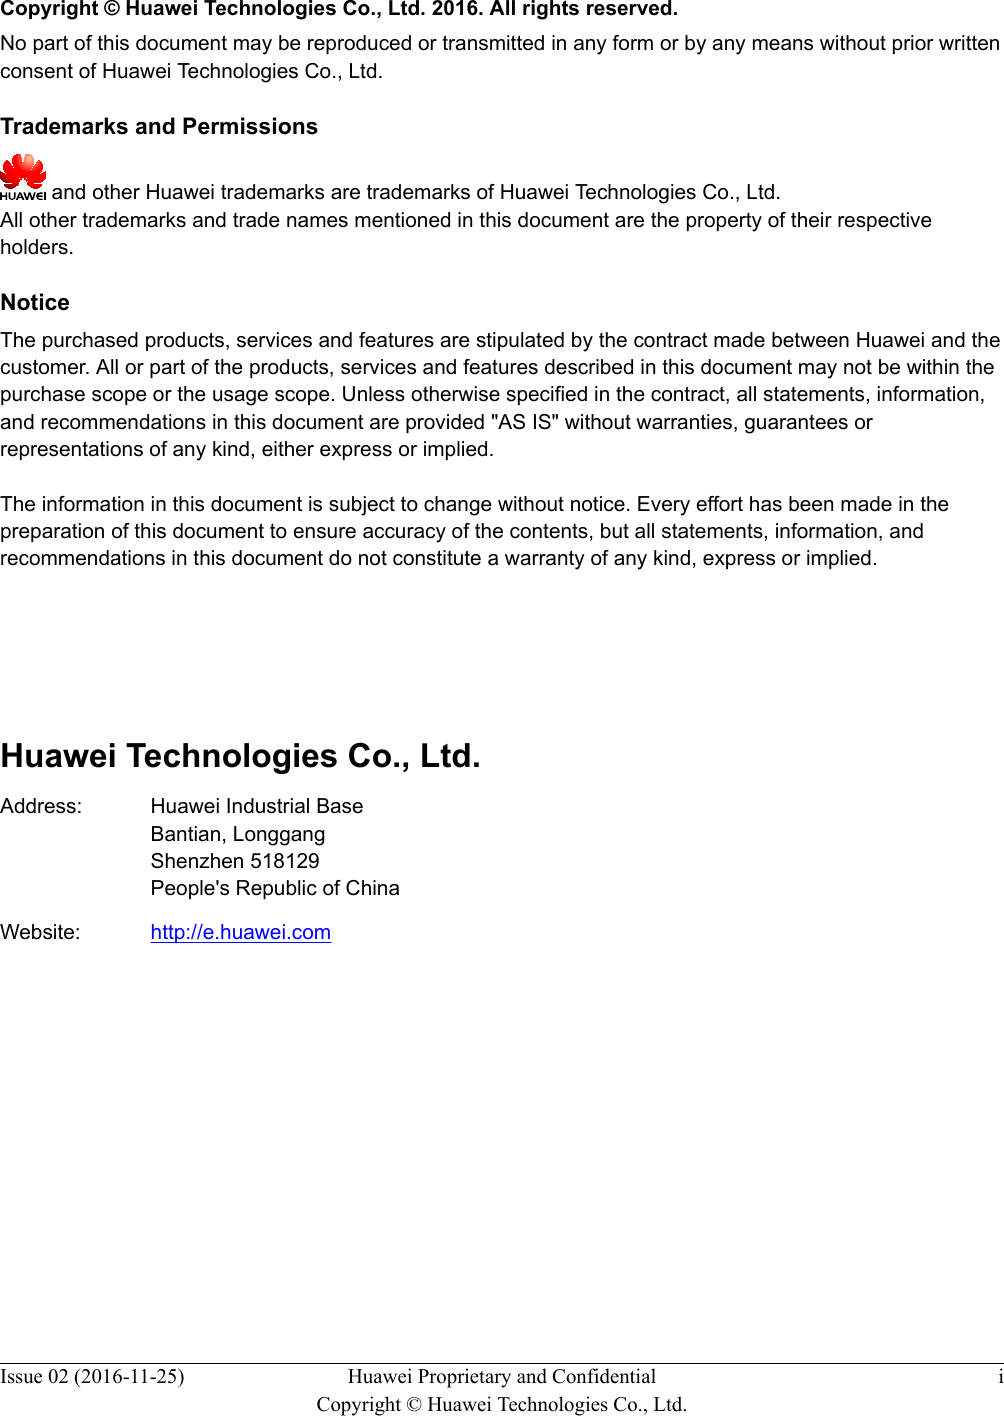   Copyright © Huawei Technologies Co., Ltd. 2016. All rights reserved.No part of this document may be reproduced or transmitted in any form or by any means without prior writtenconsent of Huawei Technologies Co., Ltd. Trademarks and Permissions and other Huawei trademarks are trademarks of Huawei Technologies Co., Ltd.All other trademarks and trade names mentioned in this document are the property of their respectiveholders. NoticeThe purchased products, services and features are stipulated by the contract made between Huawei and thecustomer. All or part of the products, services and features described in this document may not be within thepurchase scope or the usage scope. Unless otherwise specified in the contract, all statements, information,and recommendations in this document are provided &quot;AS IS&quot; without warranties, guarantees orrepresentations of any kind, either express or implied.The information in this document is subject to change without notice. Every effort has been made in thepreparation of this document to ensure accuracy of the contents, but all statements, information, andrecommendations in this document do not constitute a warranty of any kind, express or implied.        Huawei Technologies Co., Ltd.Address: Huawei Industrial BaseBantian, LonggangShenzhen 518129People&apos;s Republic of ChinaWebsite: http://e.huawei.comIssue 02 (2016-11-25) Huawei Proprietary and ConfidentialCopyright © Huawei Technologies Co., Ltd.i